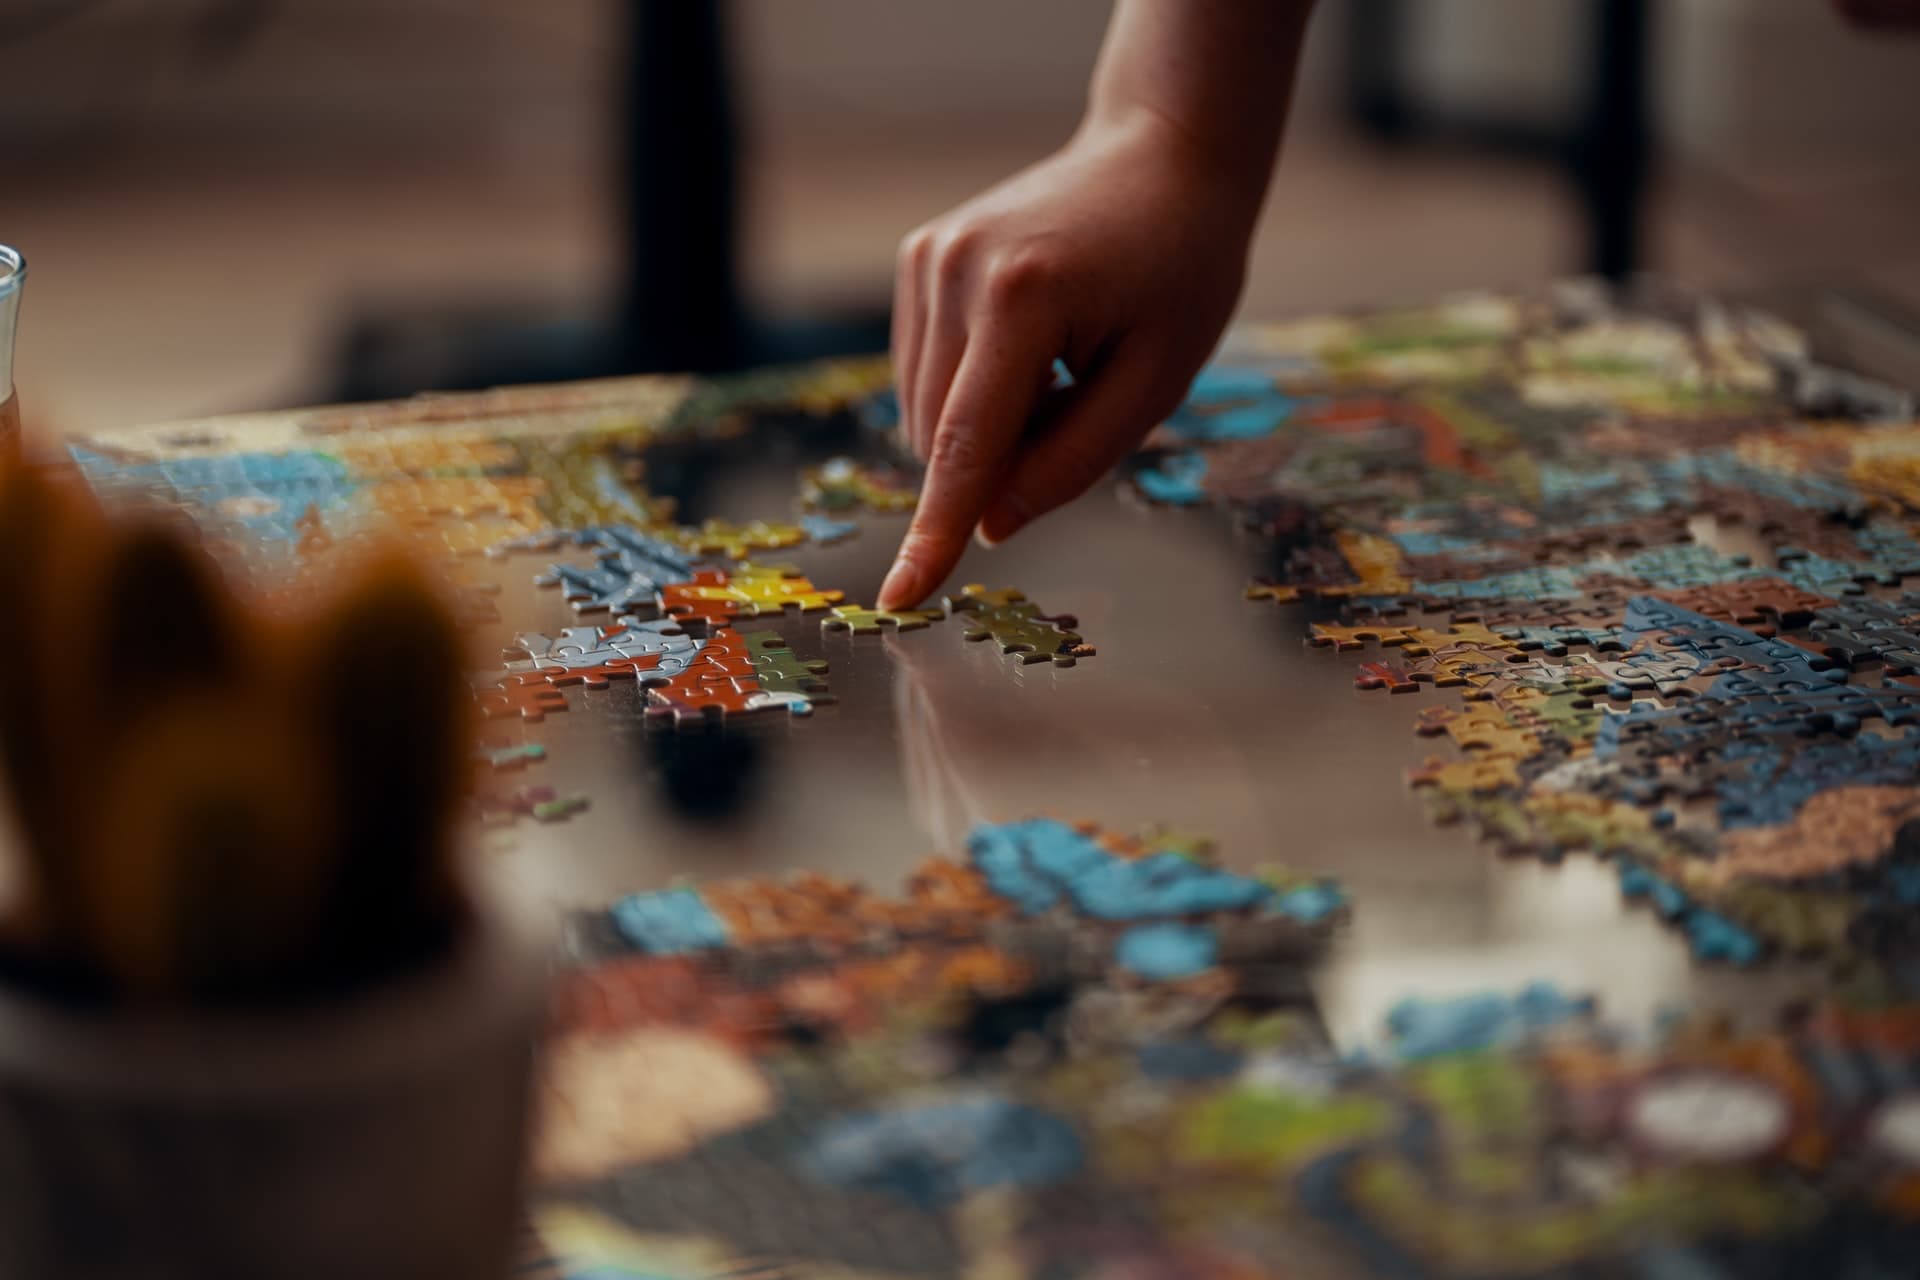 benefits of jigsaw puzzles